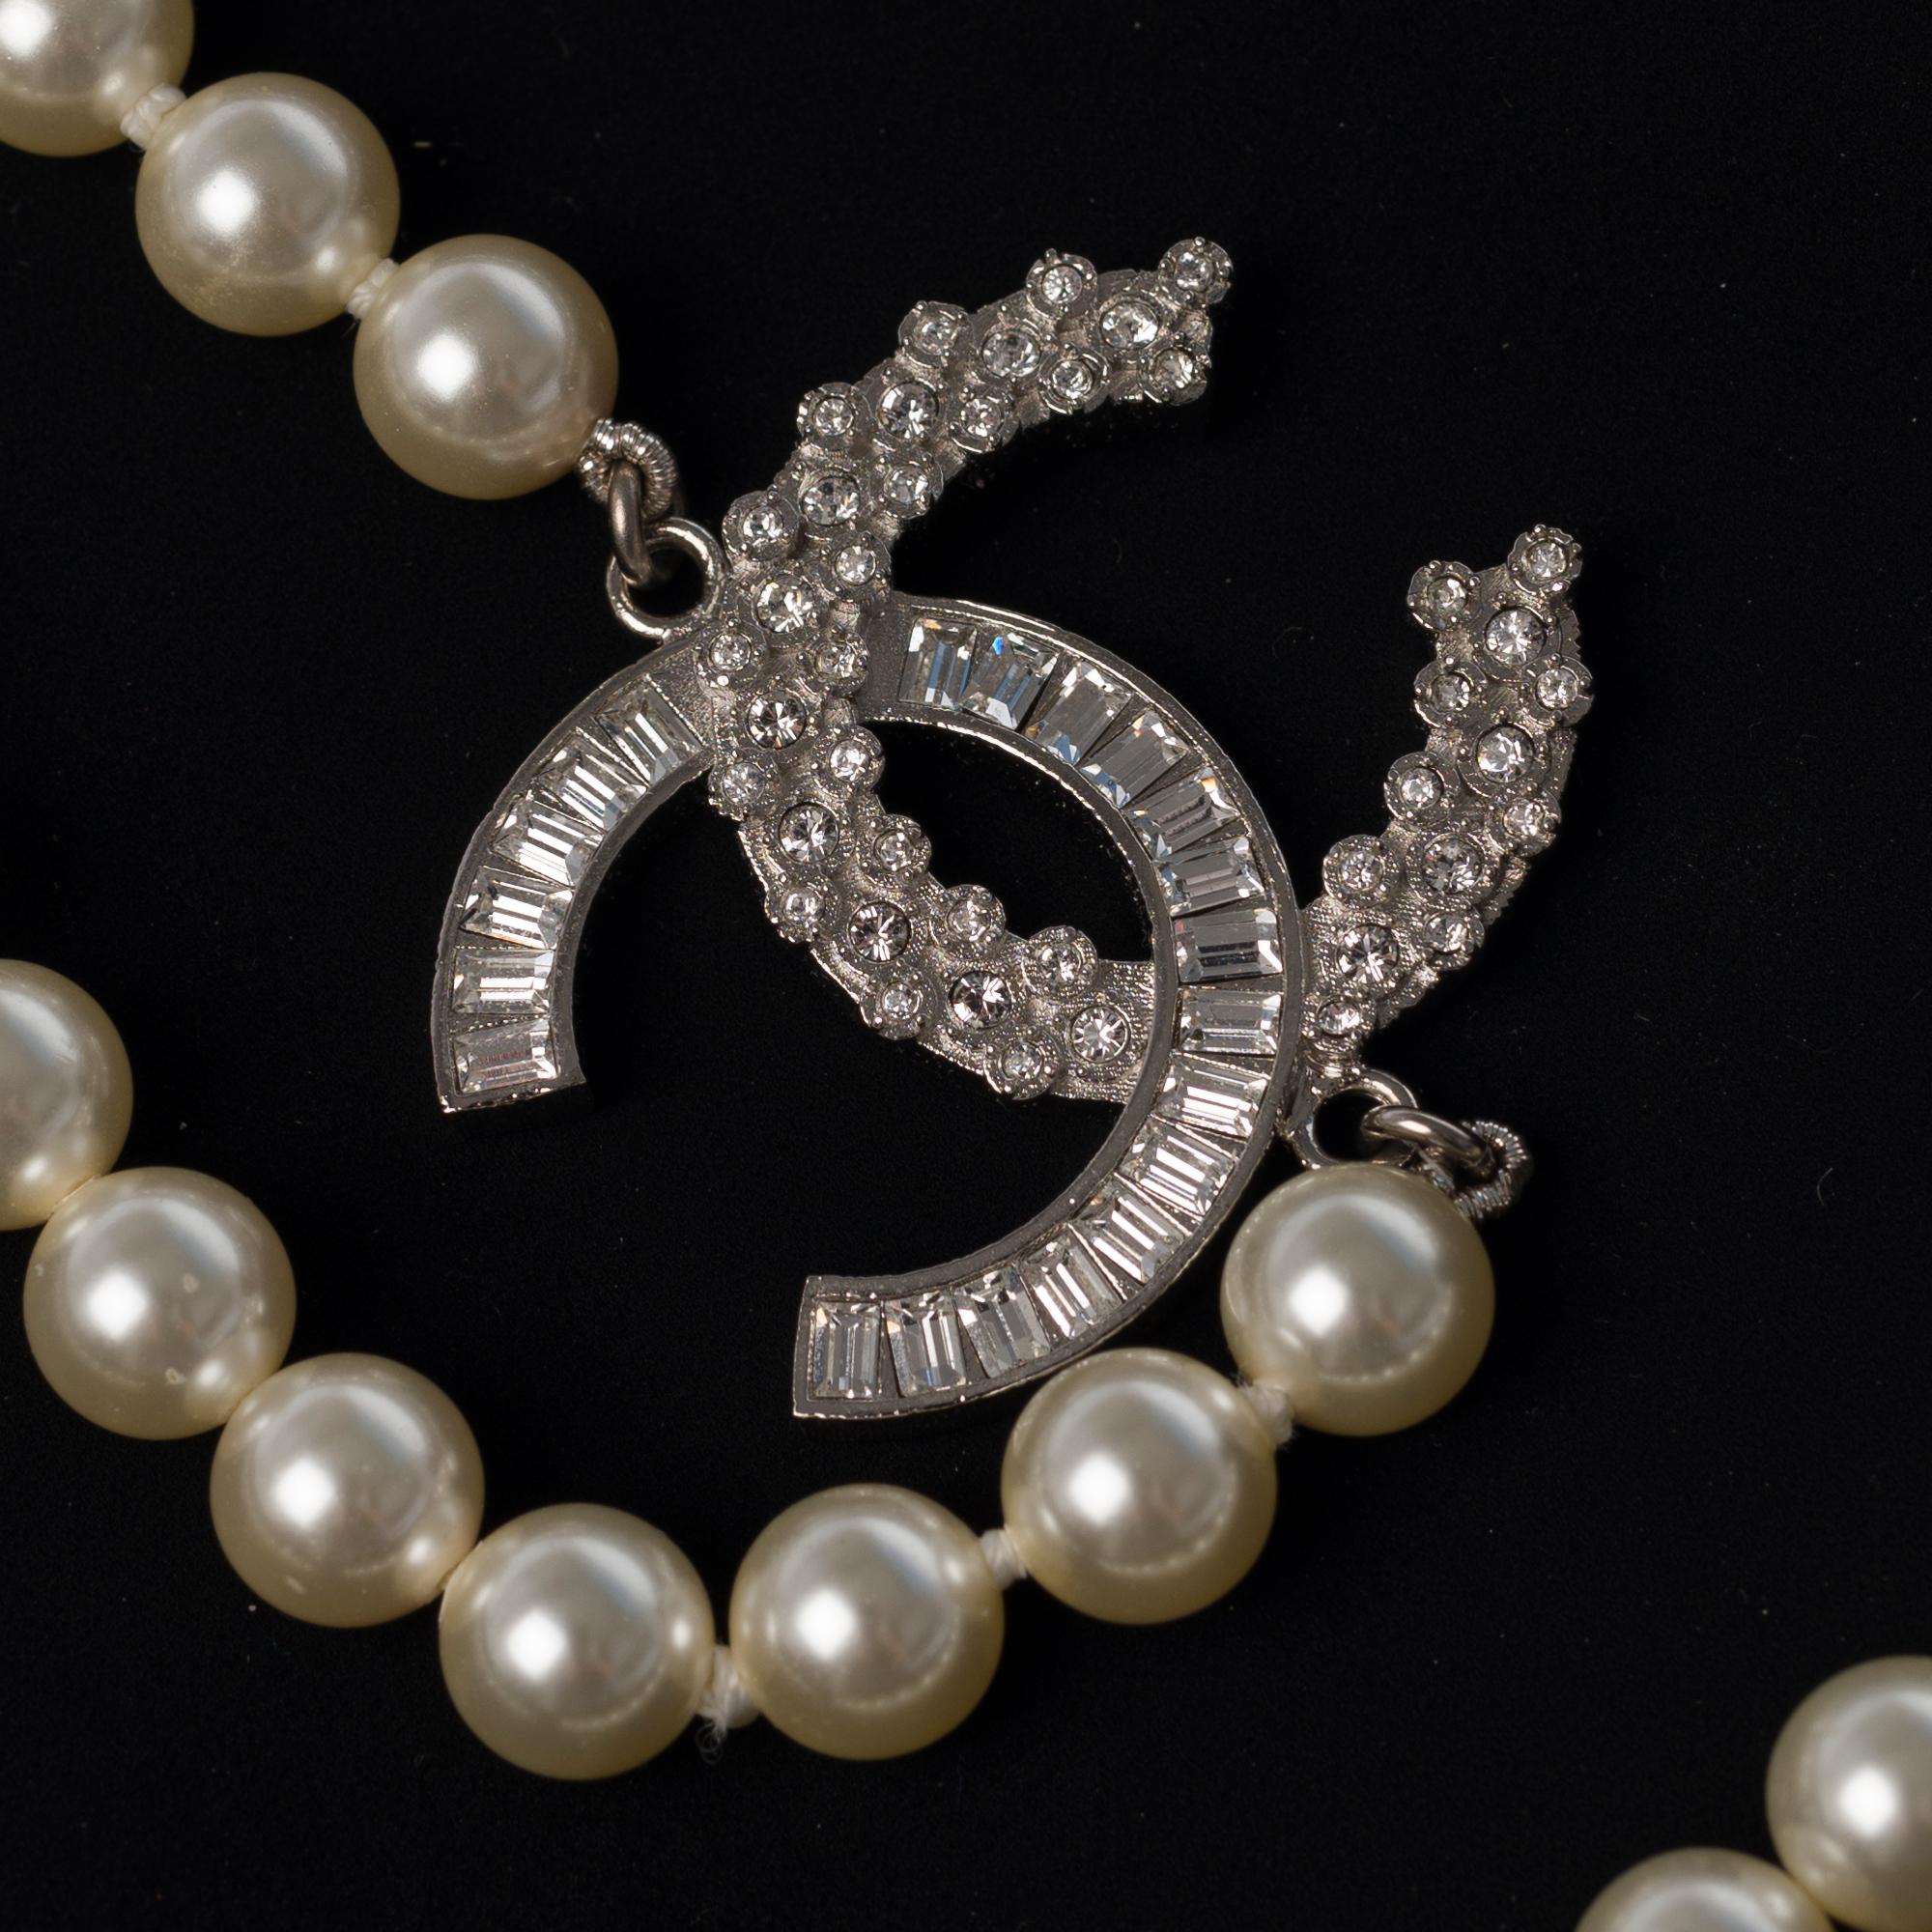 Chanel Classic Strand Lined Pearl Necklace/ Necklace with CC Interlocking fantaisie Crystal with Silver Striated Metal hardware.
Length: 120cm (60 folded in 2).
Sold with box, ribbon and box.
In excellent condition.